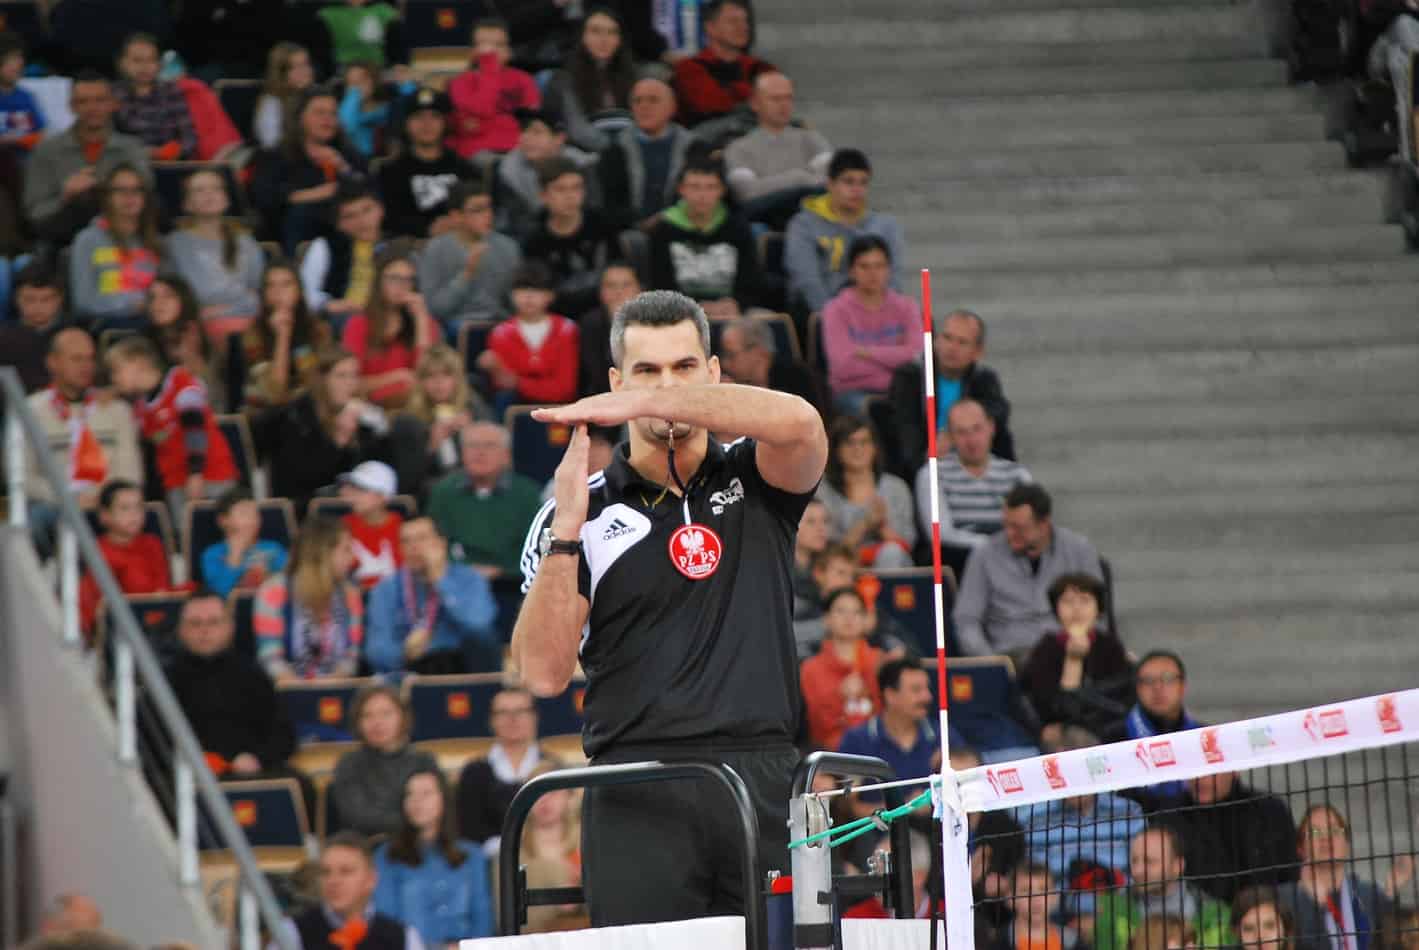 hand signals for volleyball referees